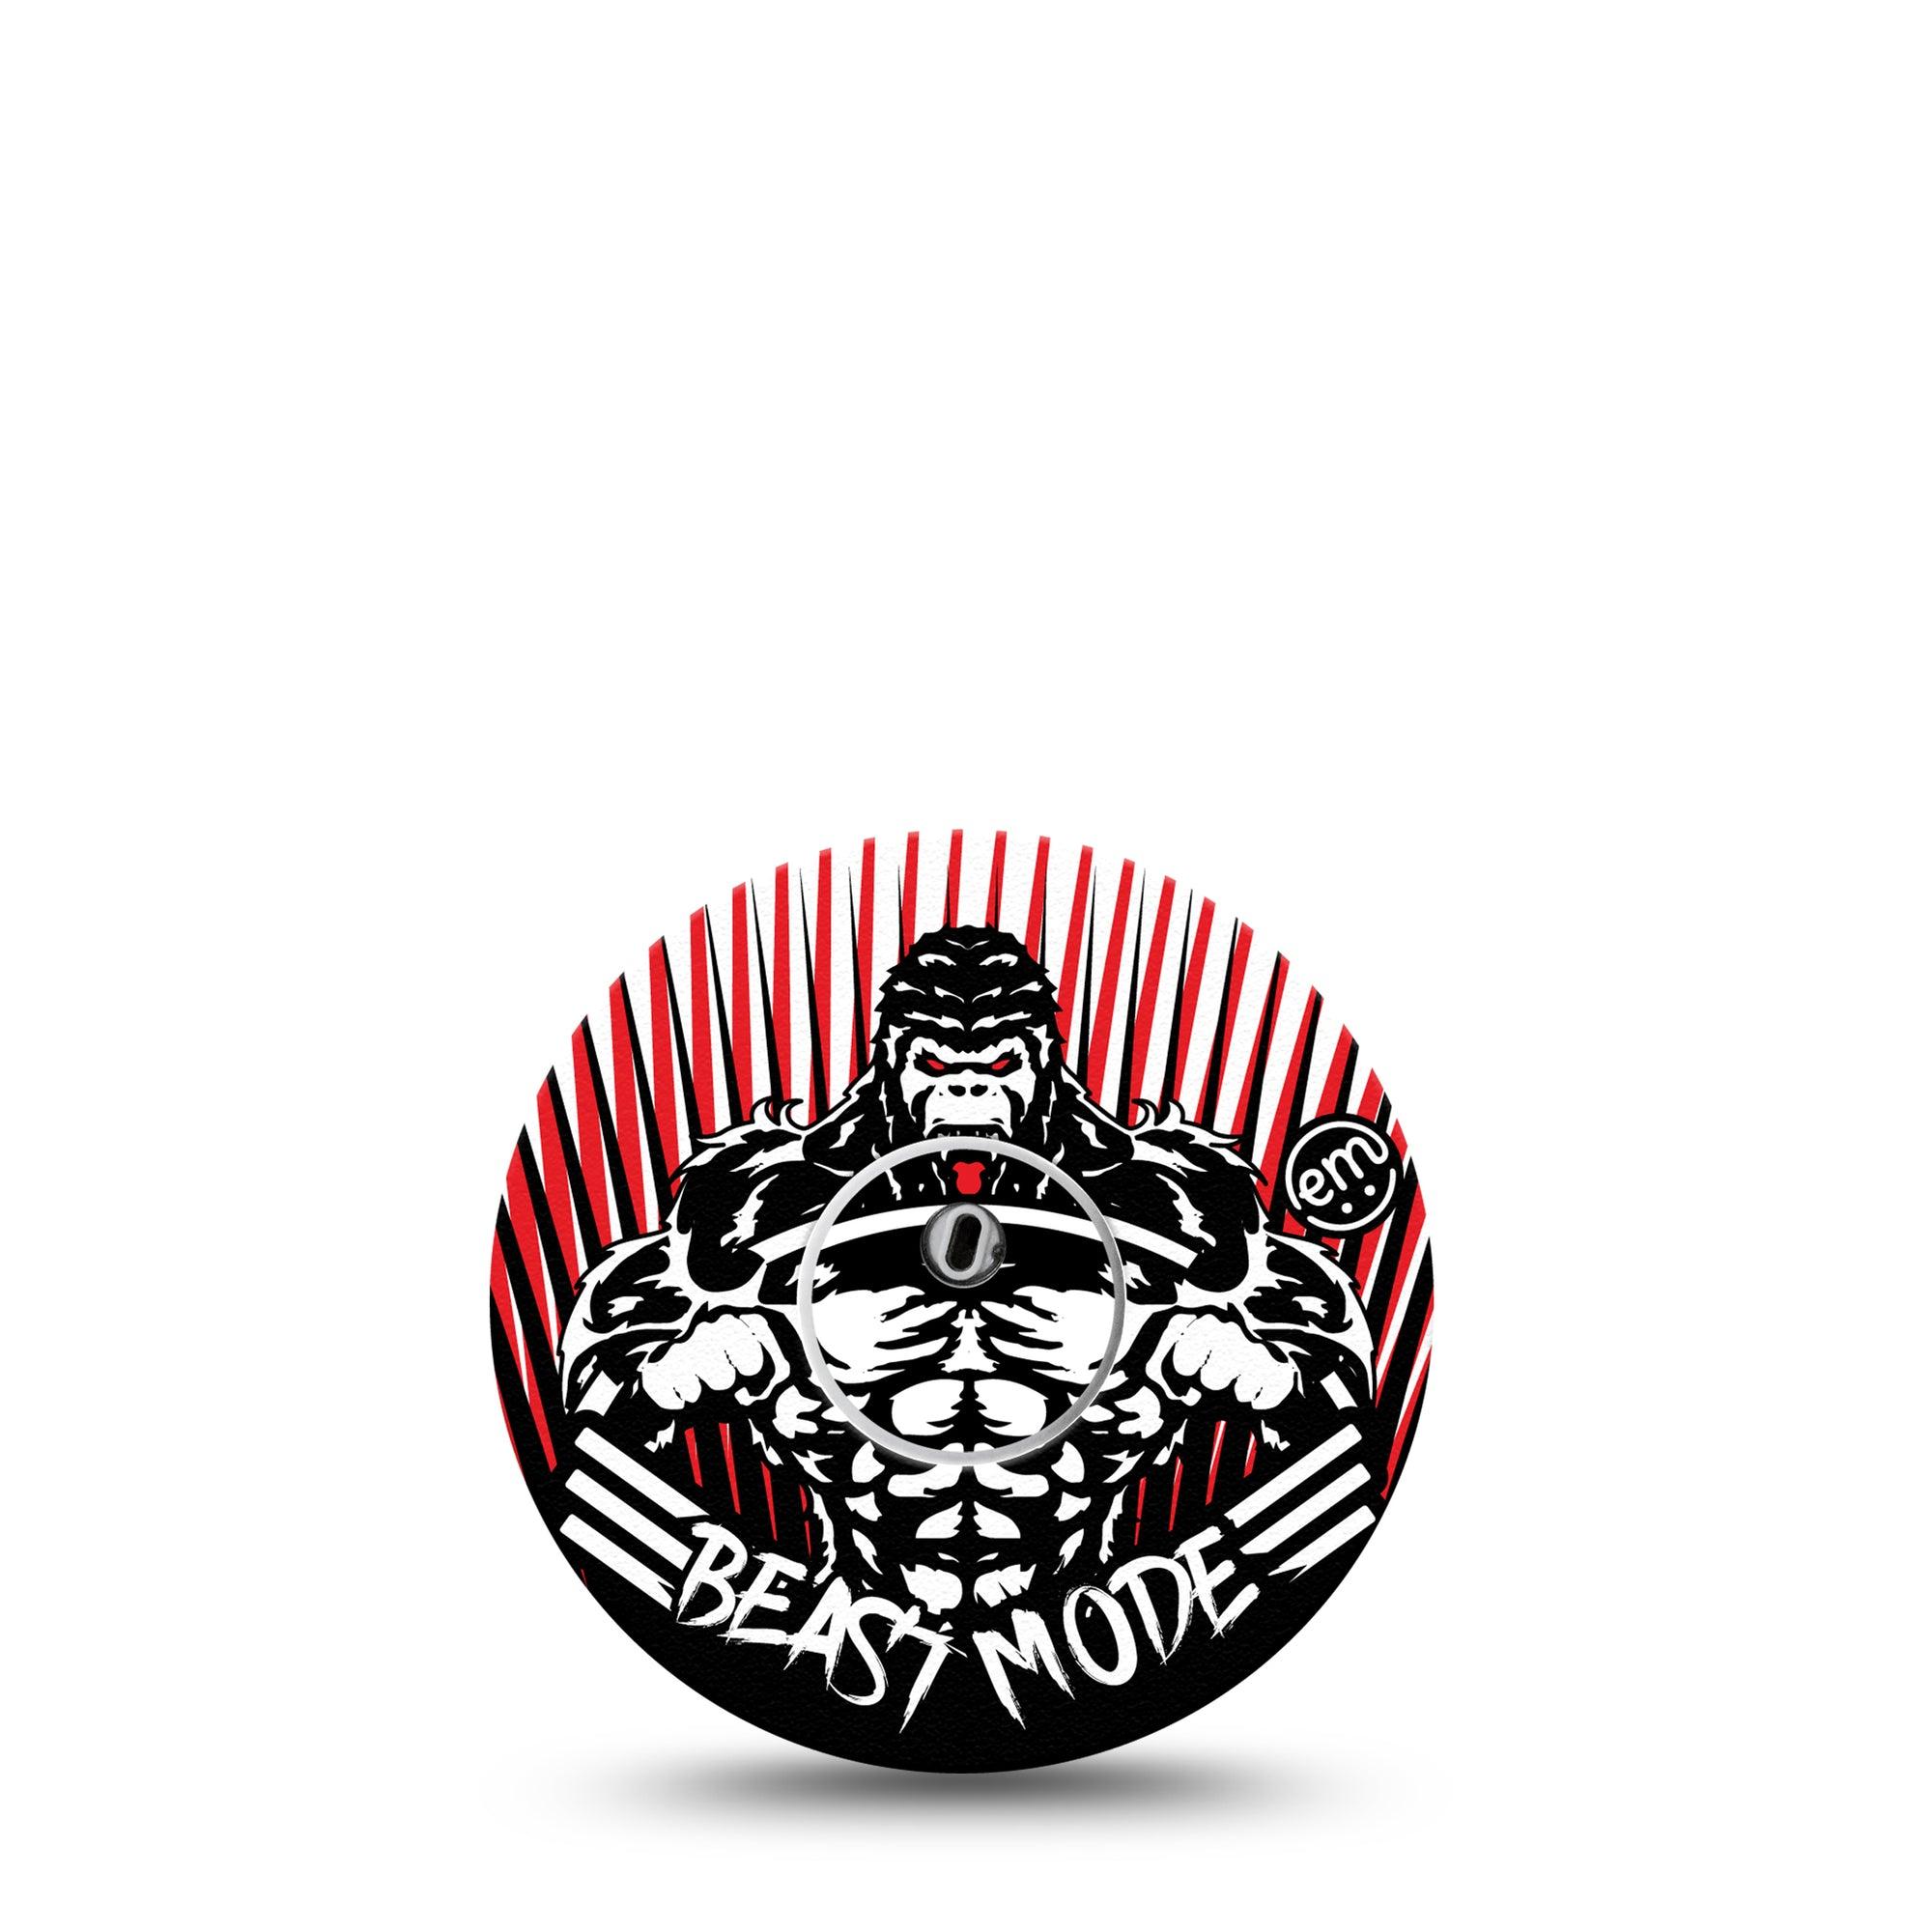 ExpressionMed Libre 3 Transmitter Sticker Muscle Man, Body Building Themed Design, Tape and Sticker